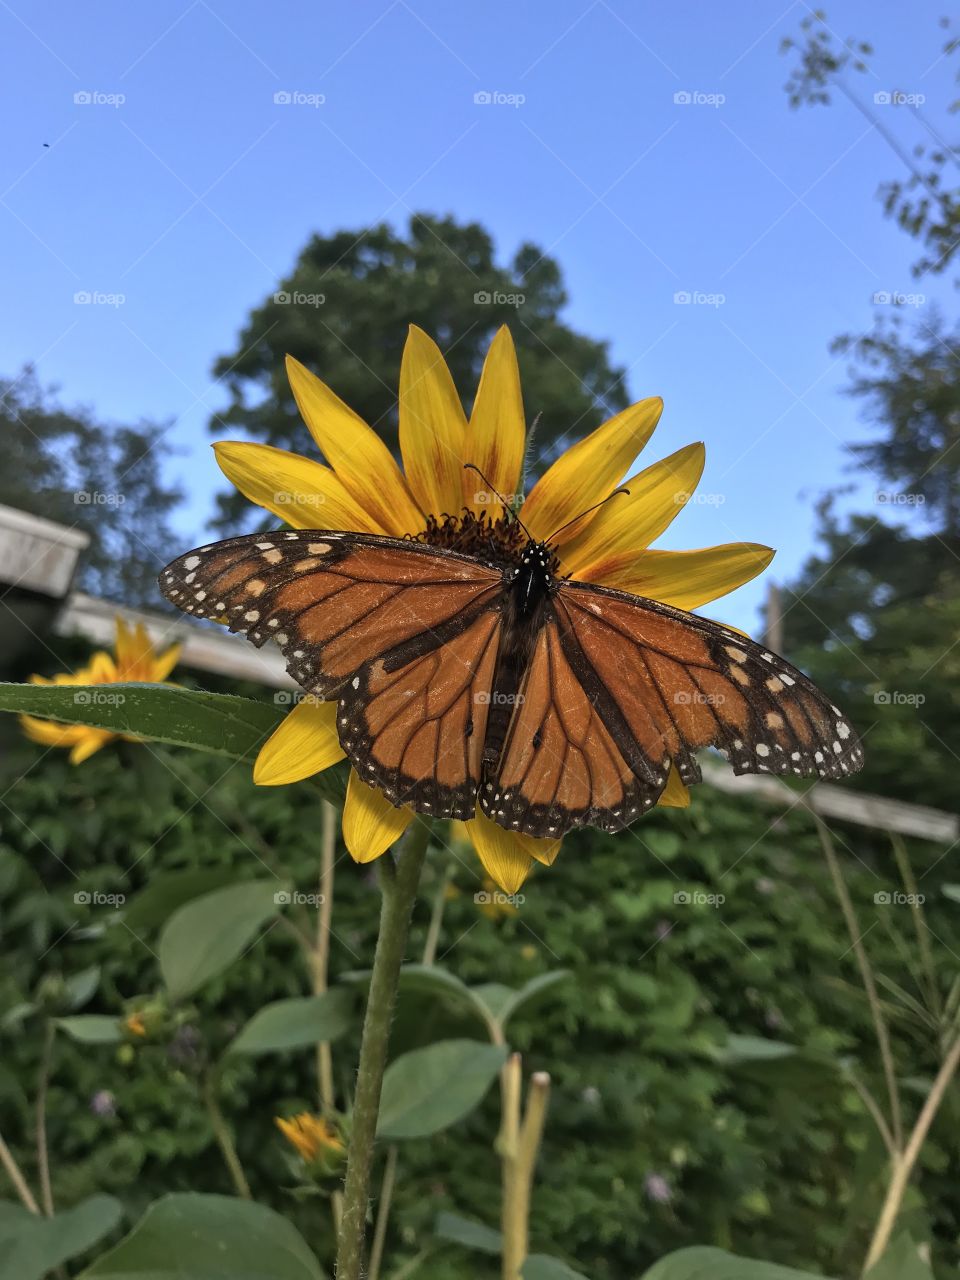 The day the Monarchs came to visit. And made friends with our sunflowers outside. Such beauty must be captured. The elements were there for the taking. 